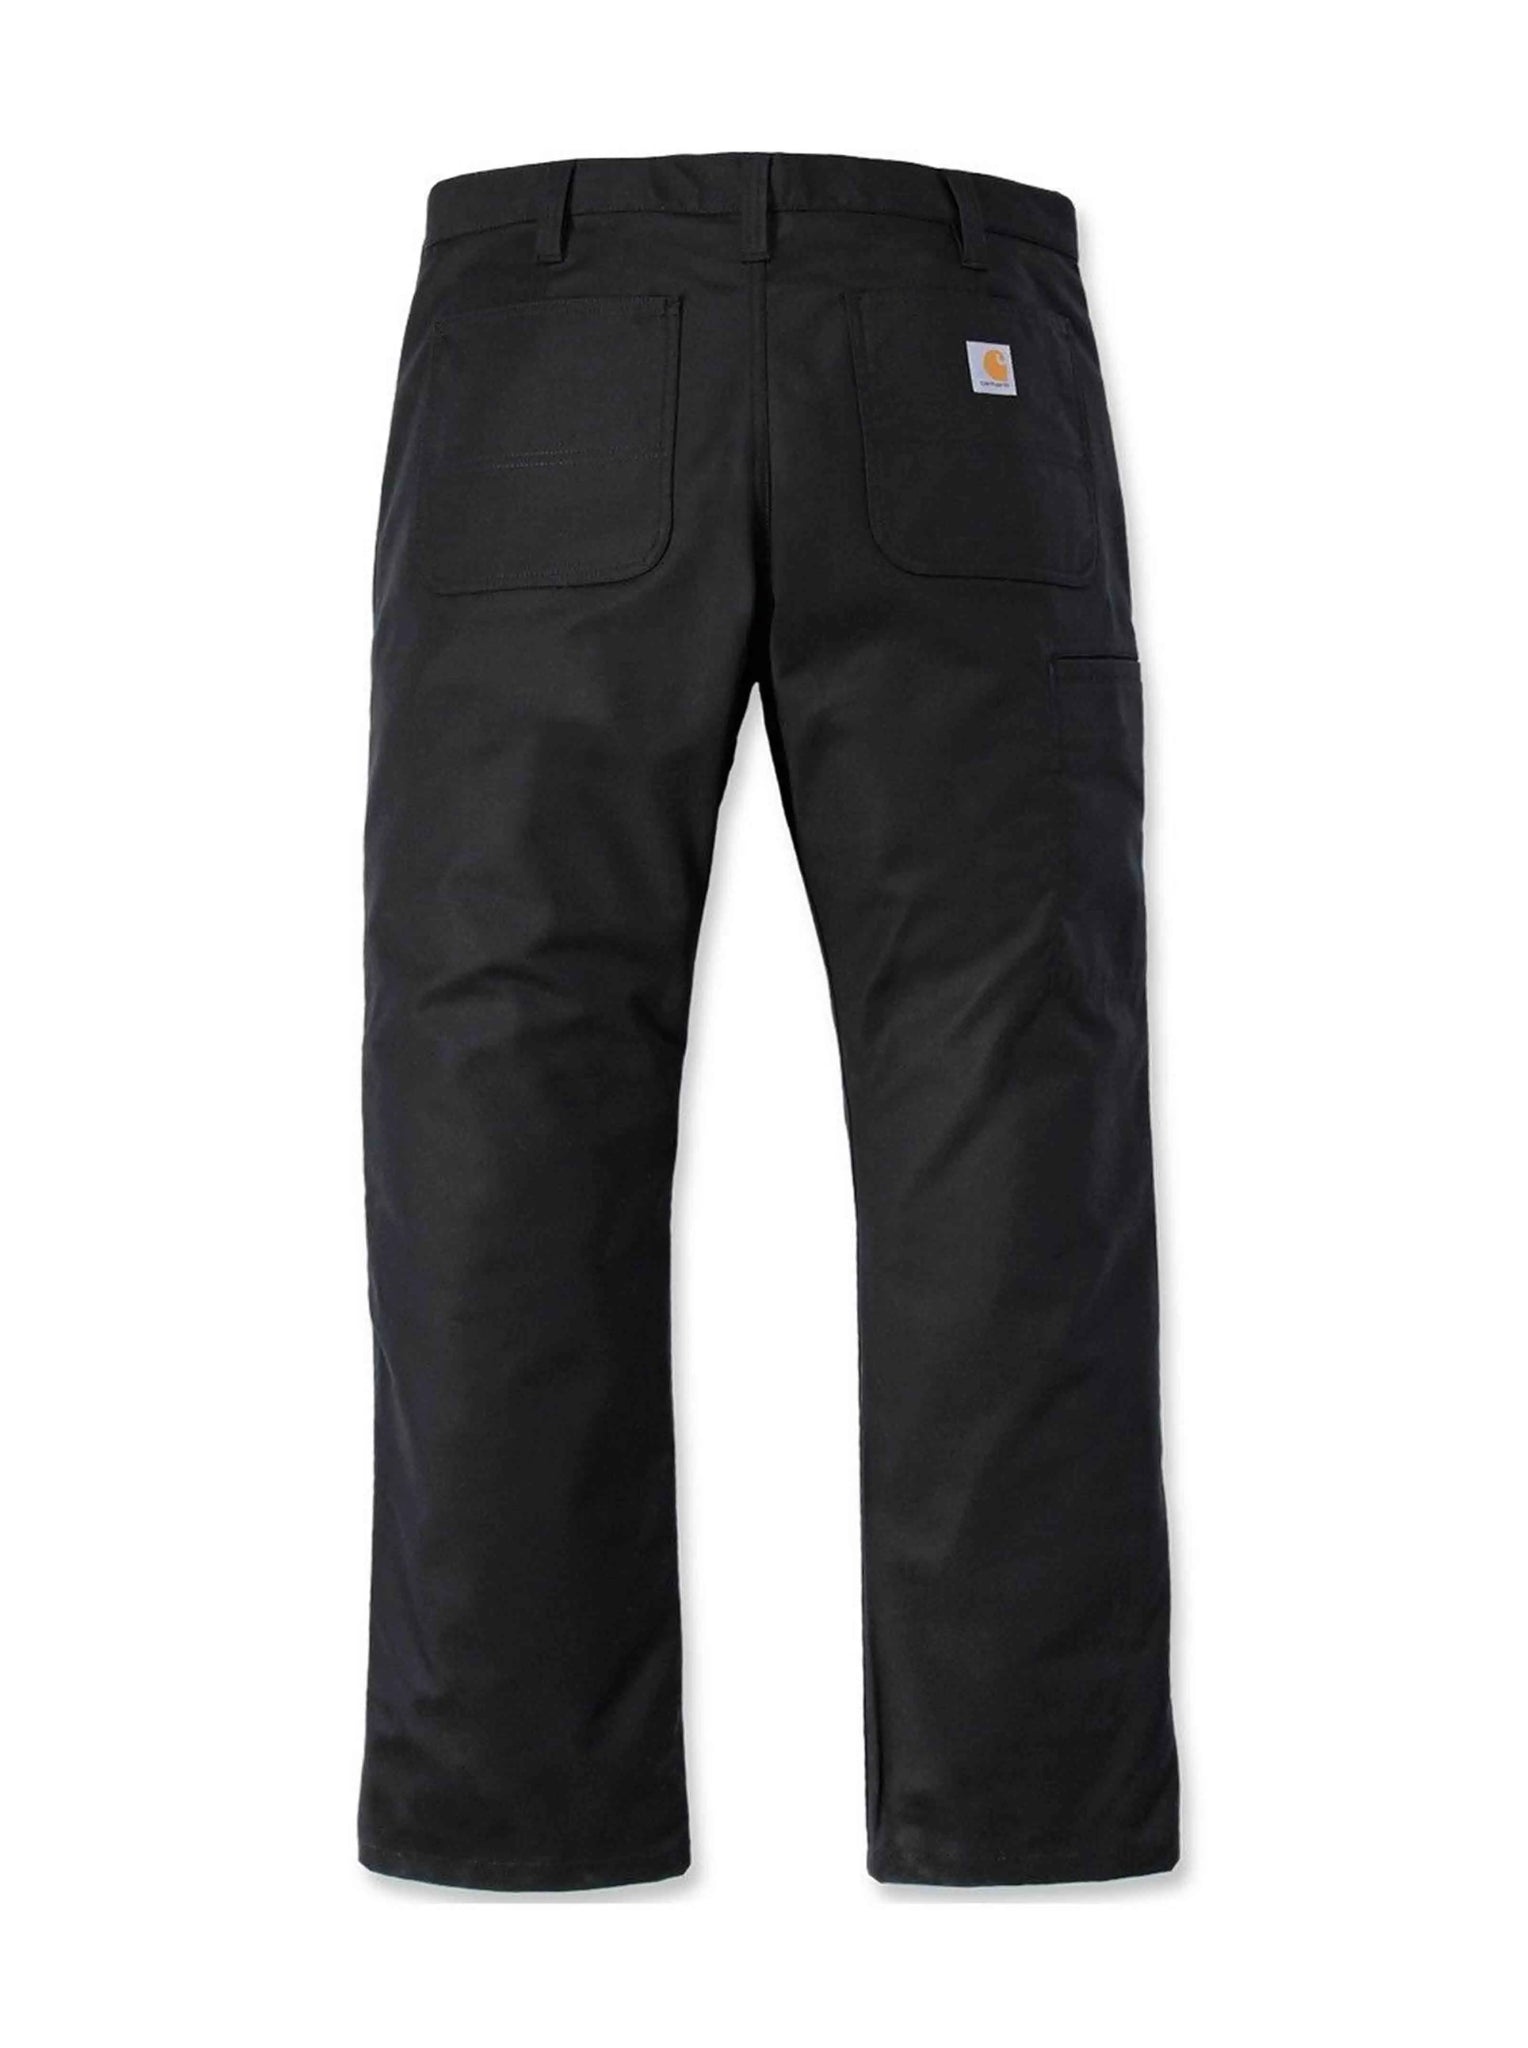 Carhartt Professional Series Relaxed Fit Pant Shadow Prior